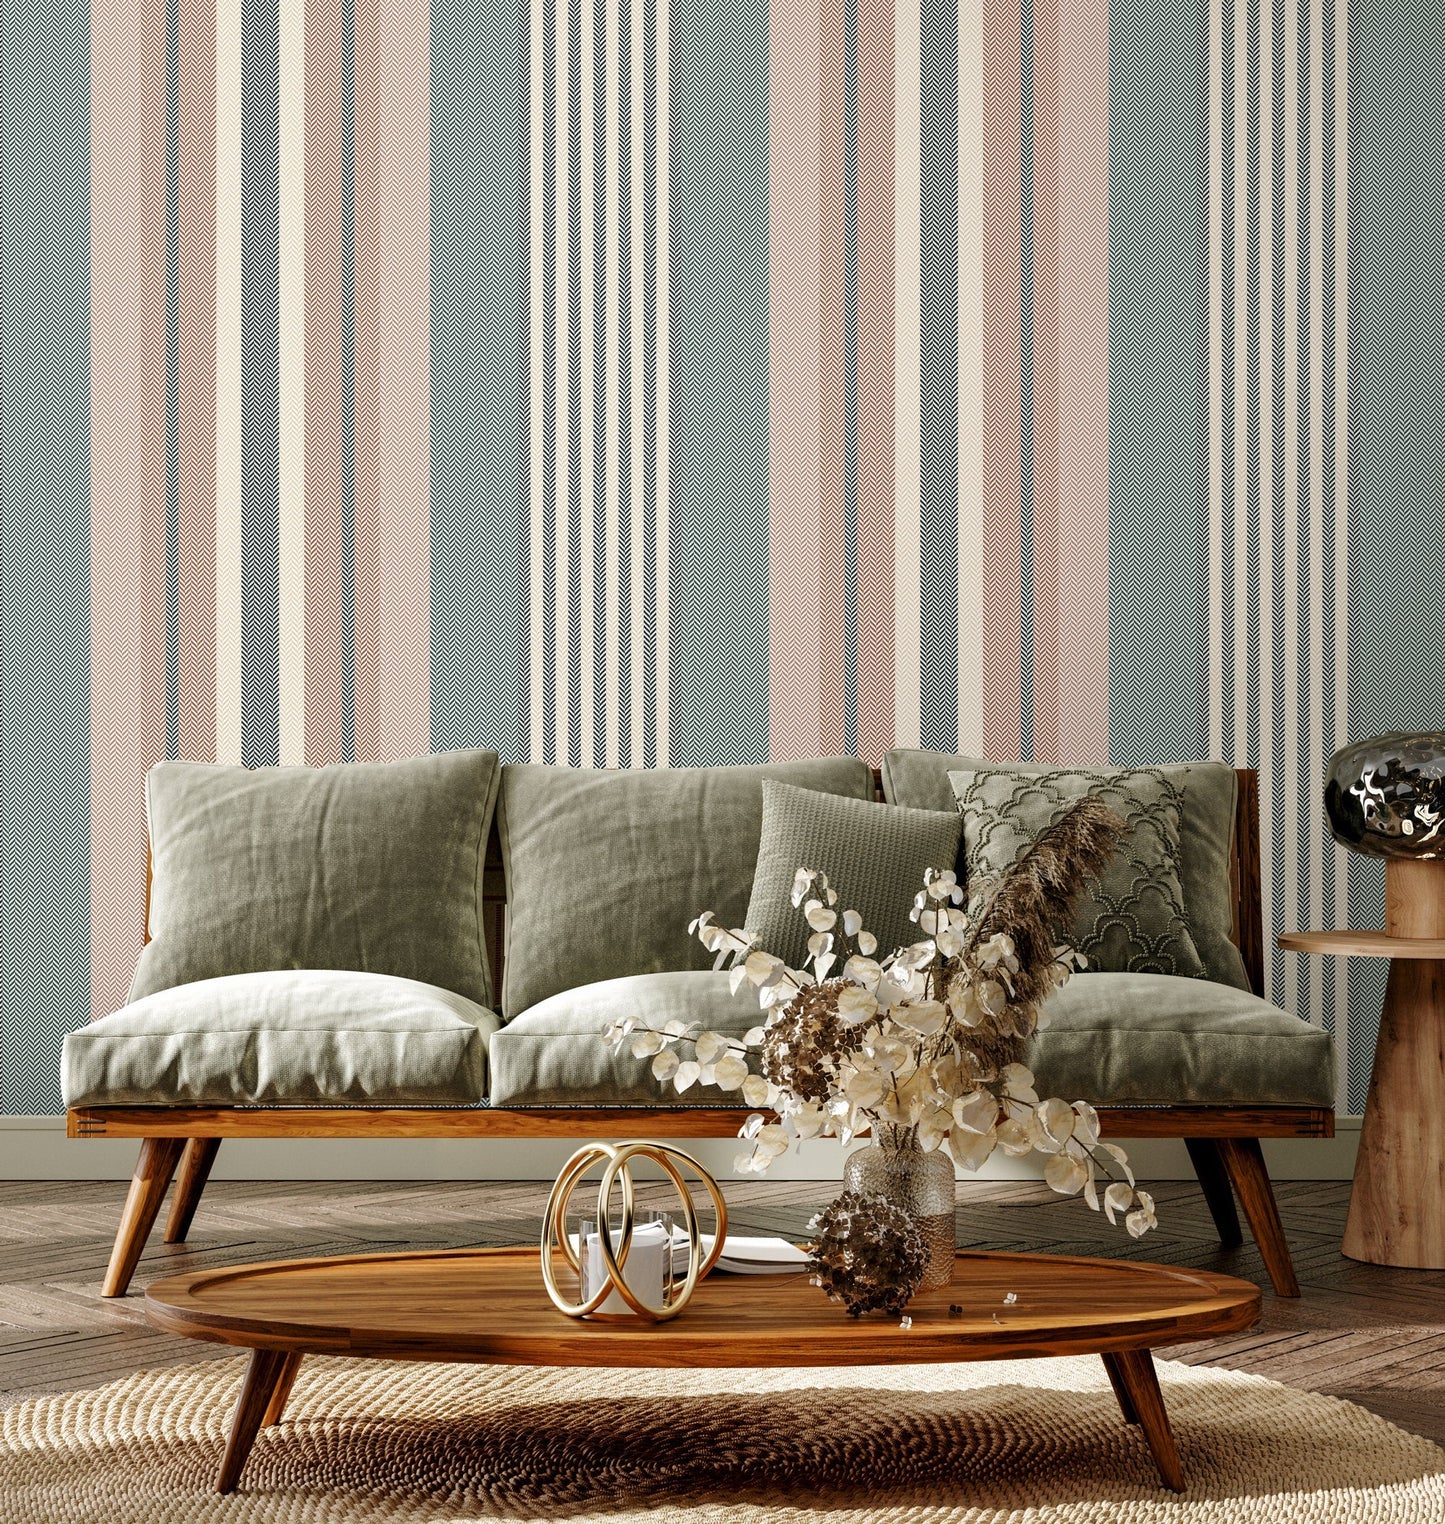 Striped Farmhouse Wallpaper Geometric Wallpaper Peel and Stick and Traditional Wallpaper - D849